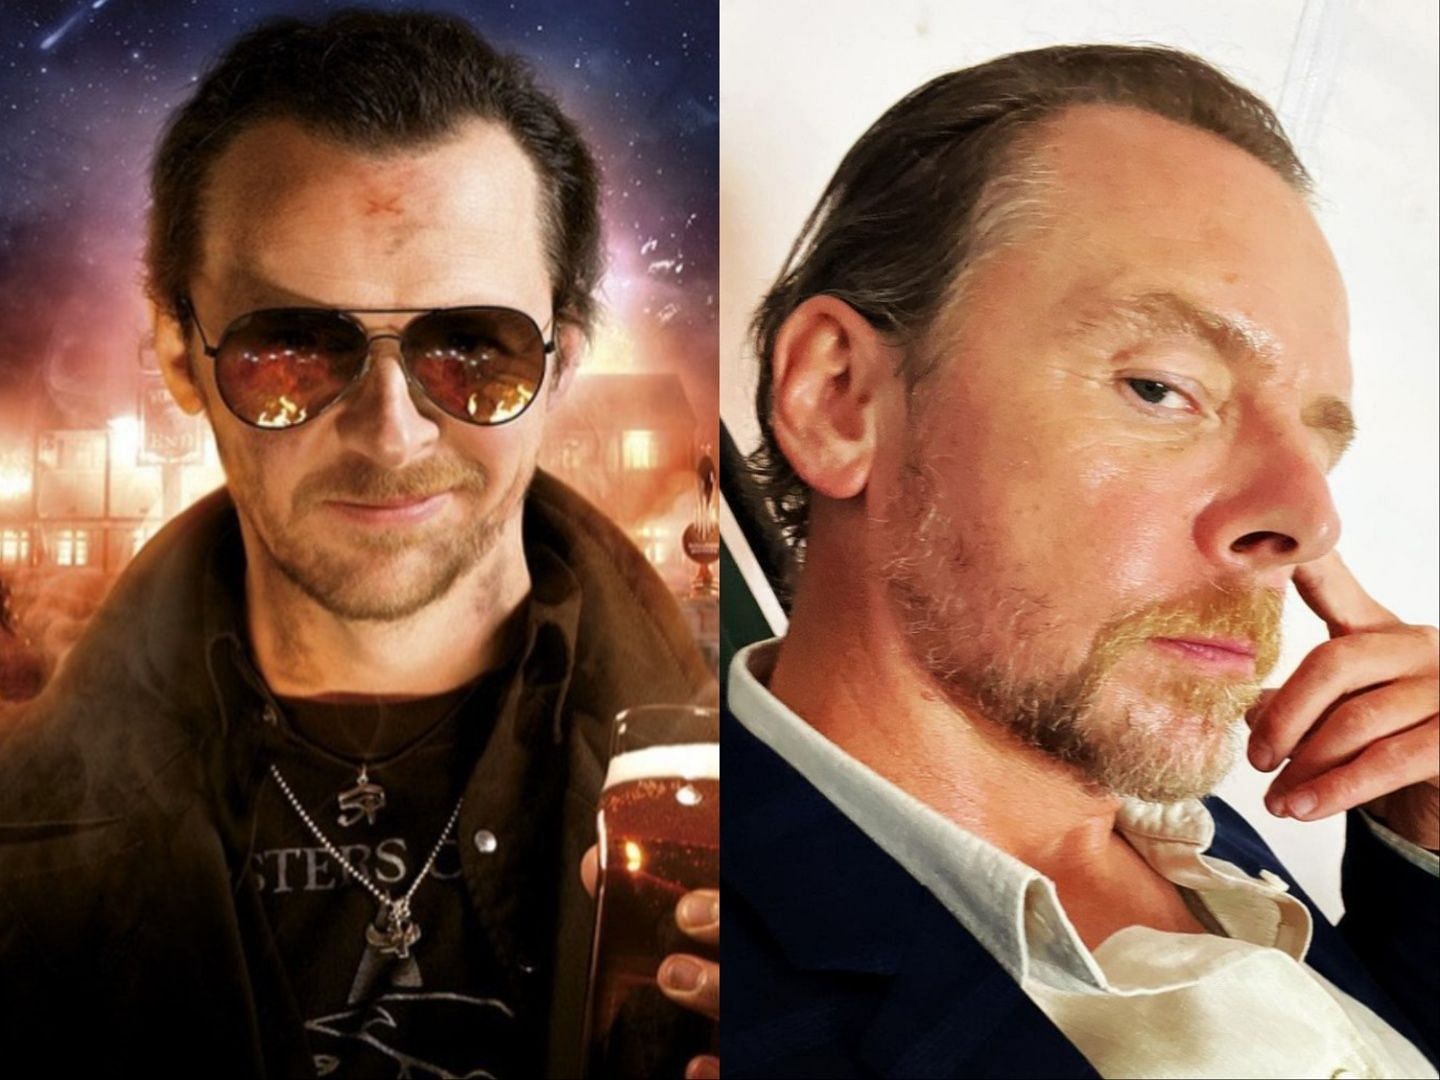 Simon Pegg Says He Hid Alcoholism While Filming 'Mission: Impossible